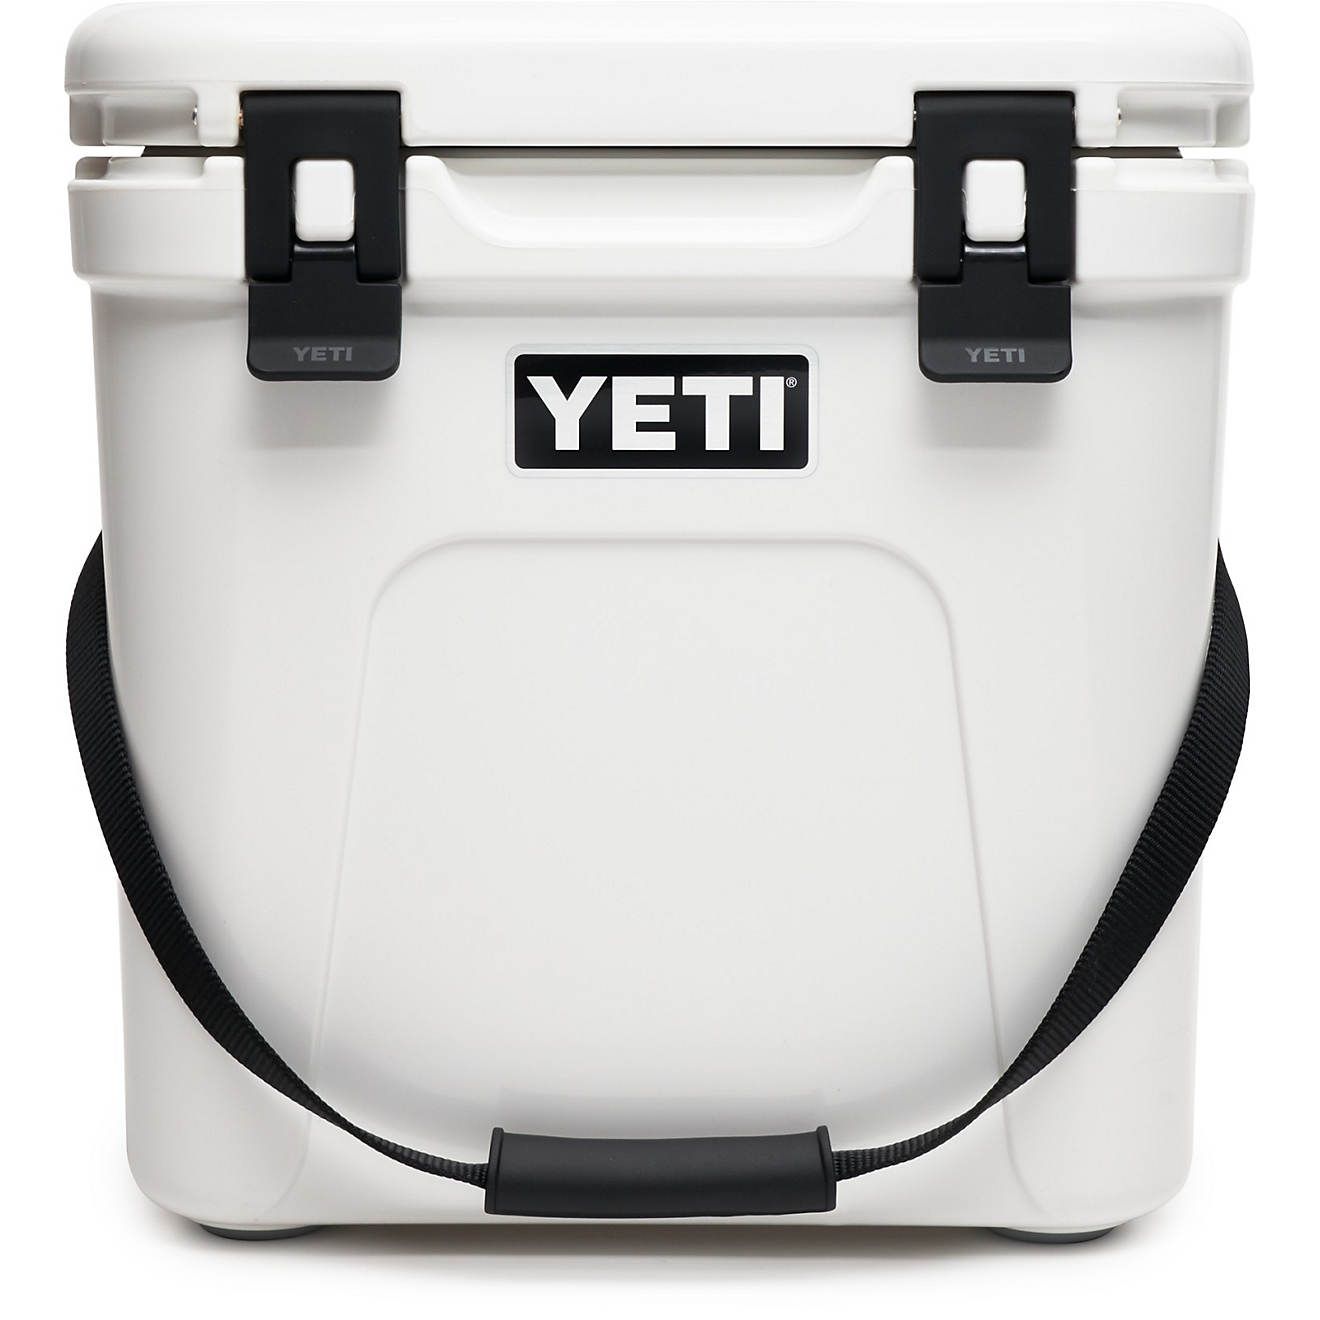 YETI Roadie 24 18-Can Hard Cooler | Academy Sports + Outdoor Affiliate